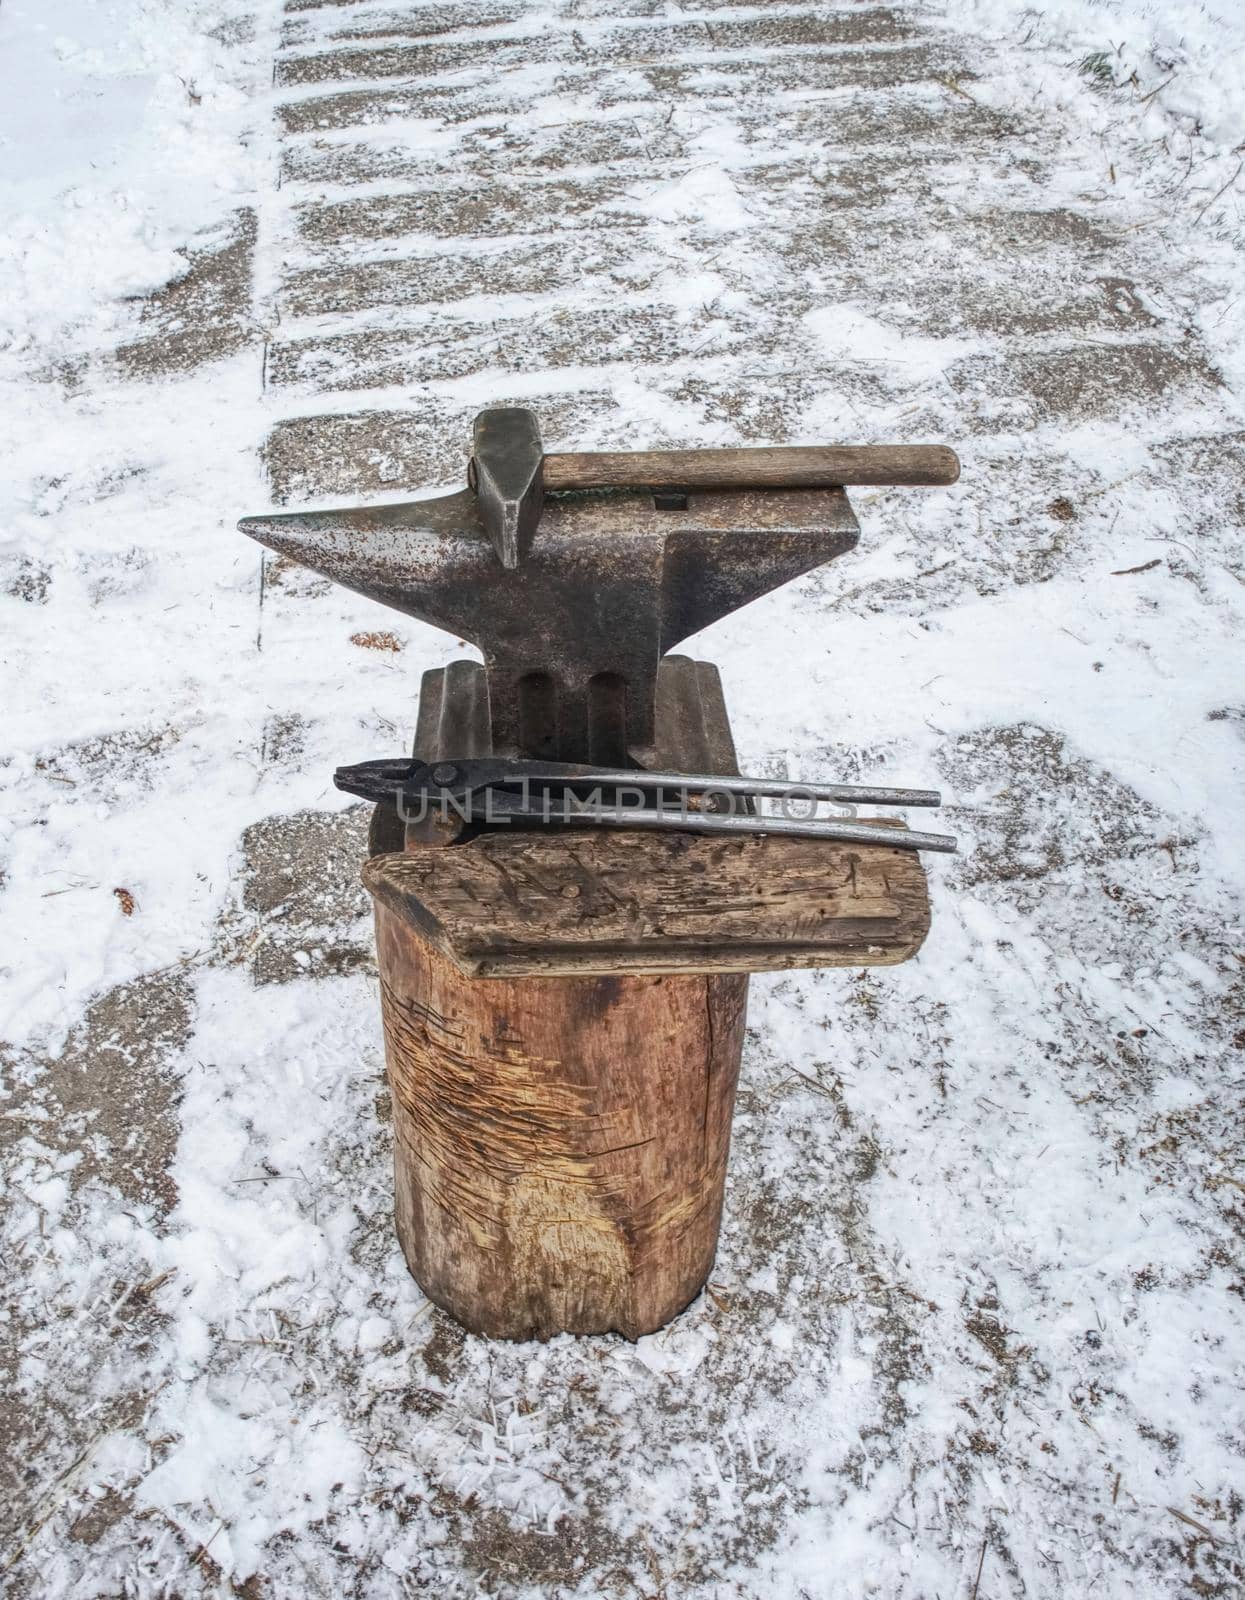 Hammer lies on the anvil, the blacksmith work place in horse farm. Winter morning with snow cover.